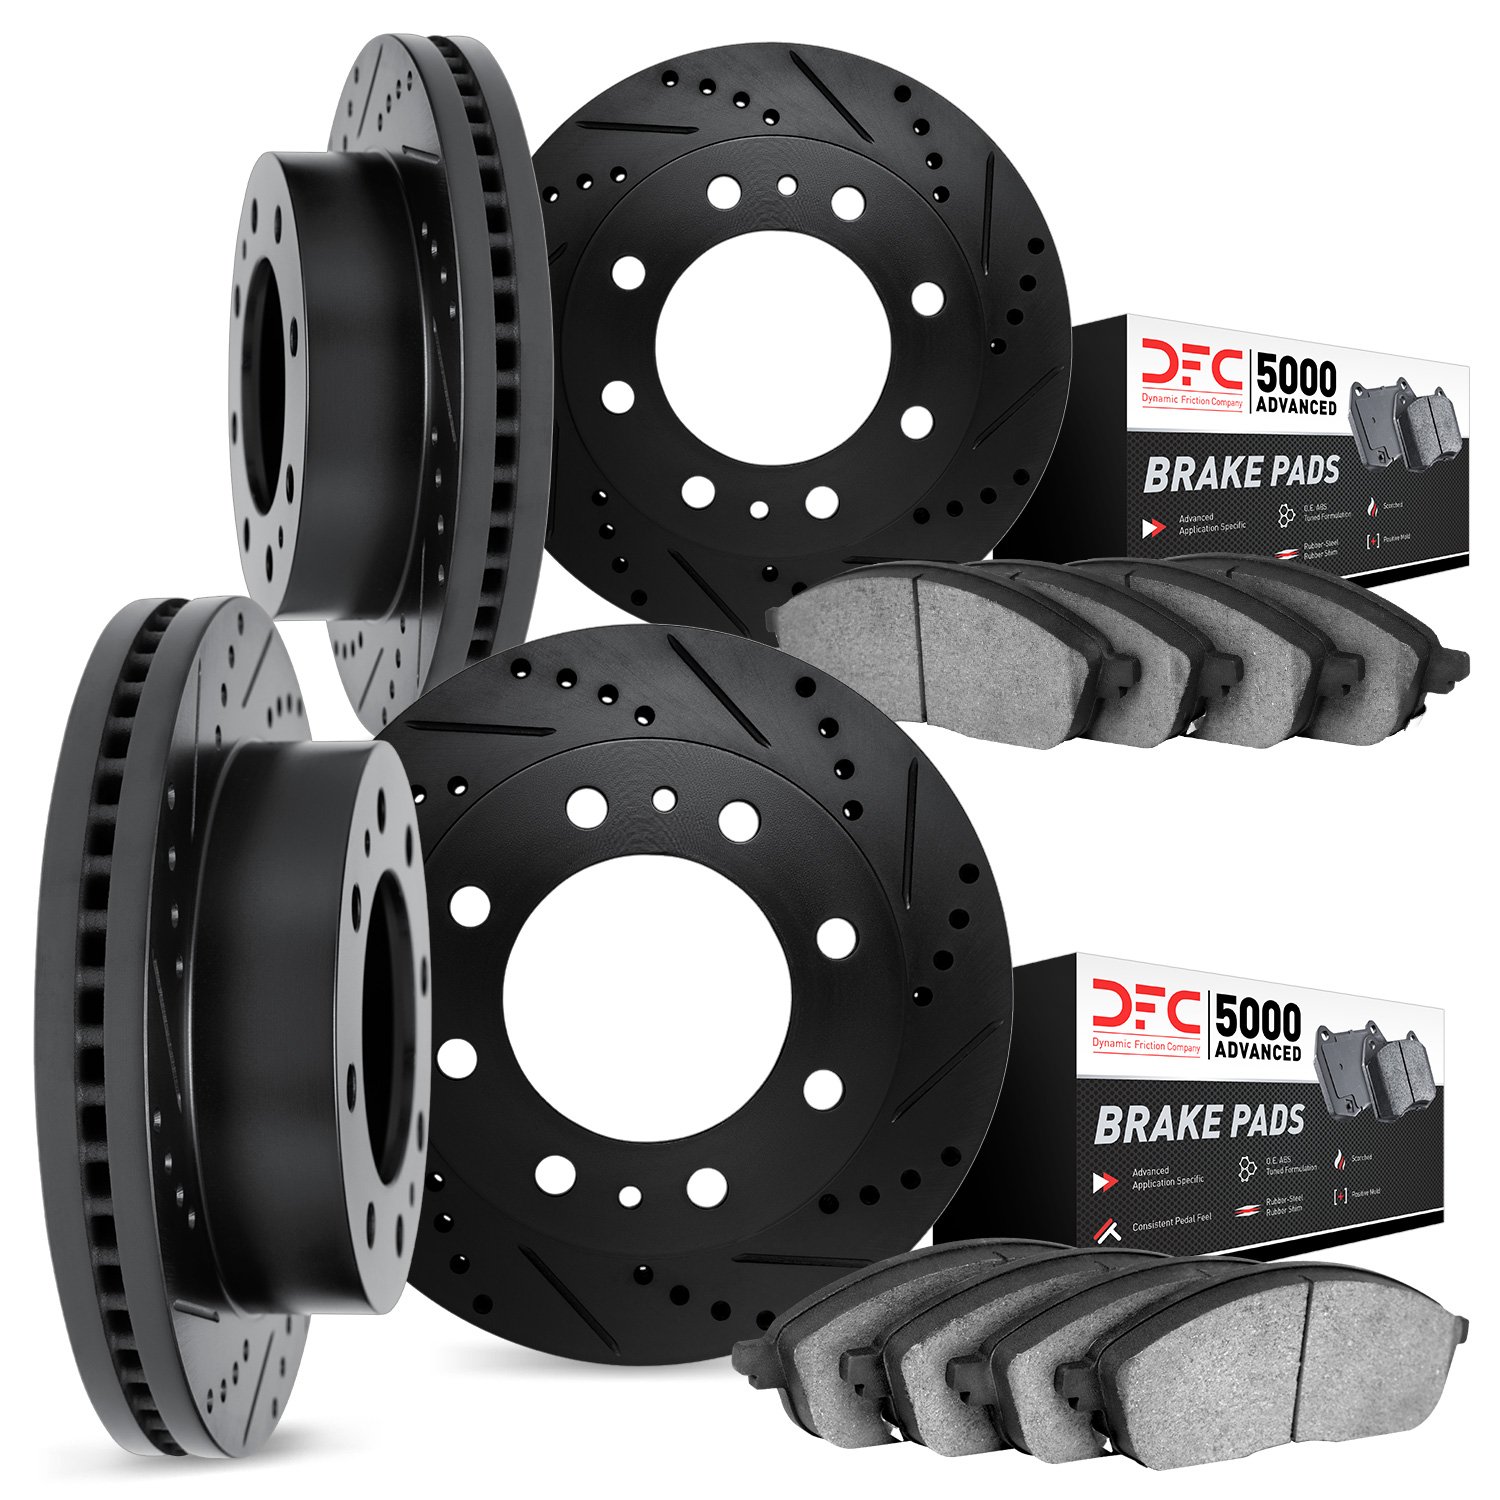 8504-48021 Drilled/Slotted Brake Rotors w/5000 Advanced Brake Pads Kit [Black], 2001-2003 GM, Position: Front and Rear